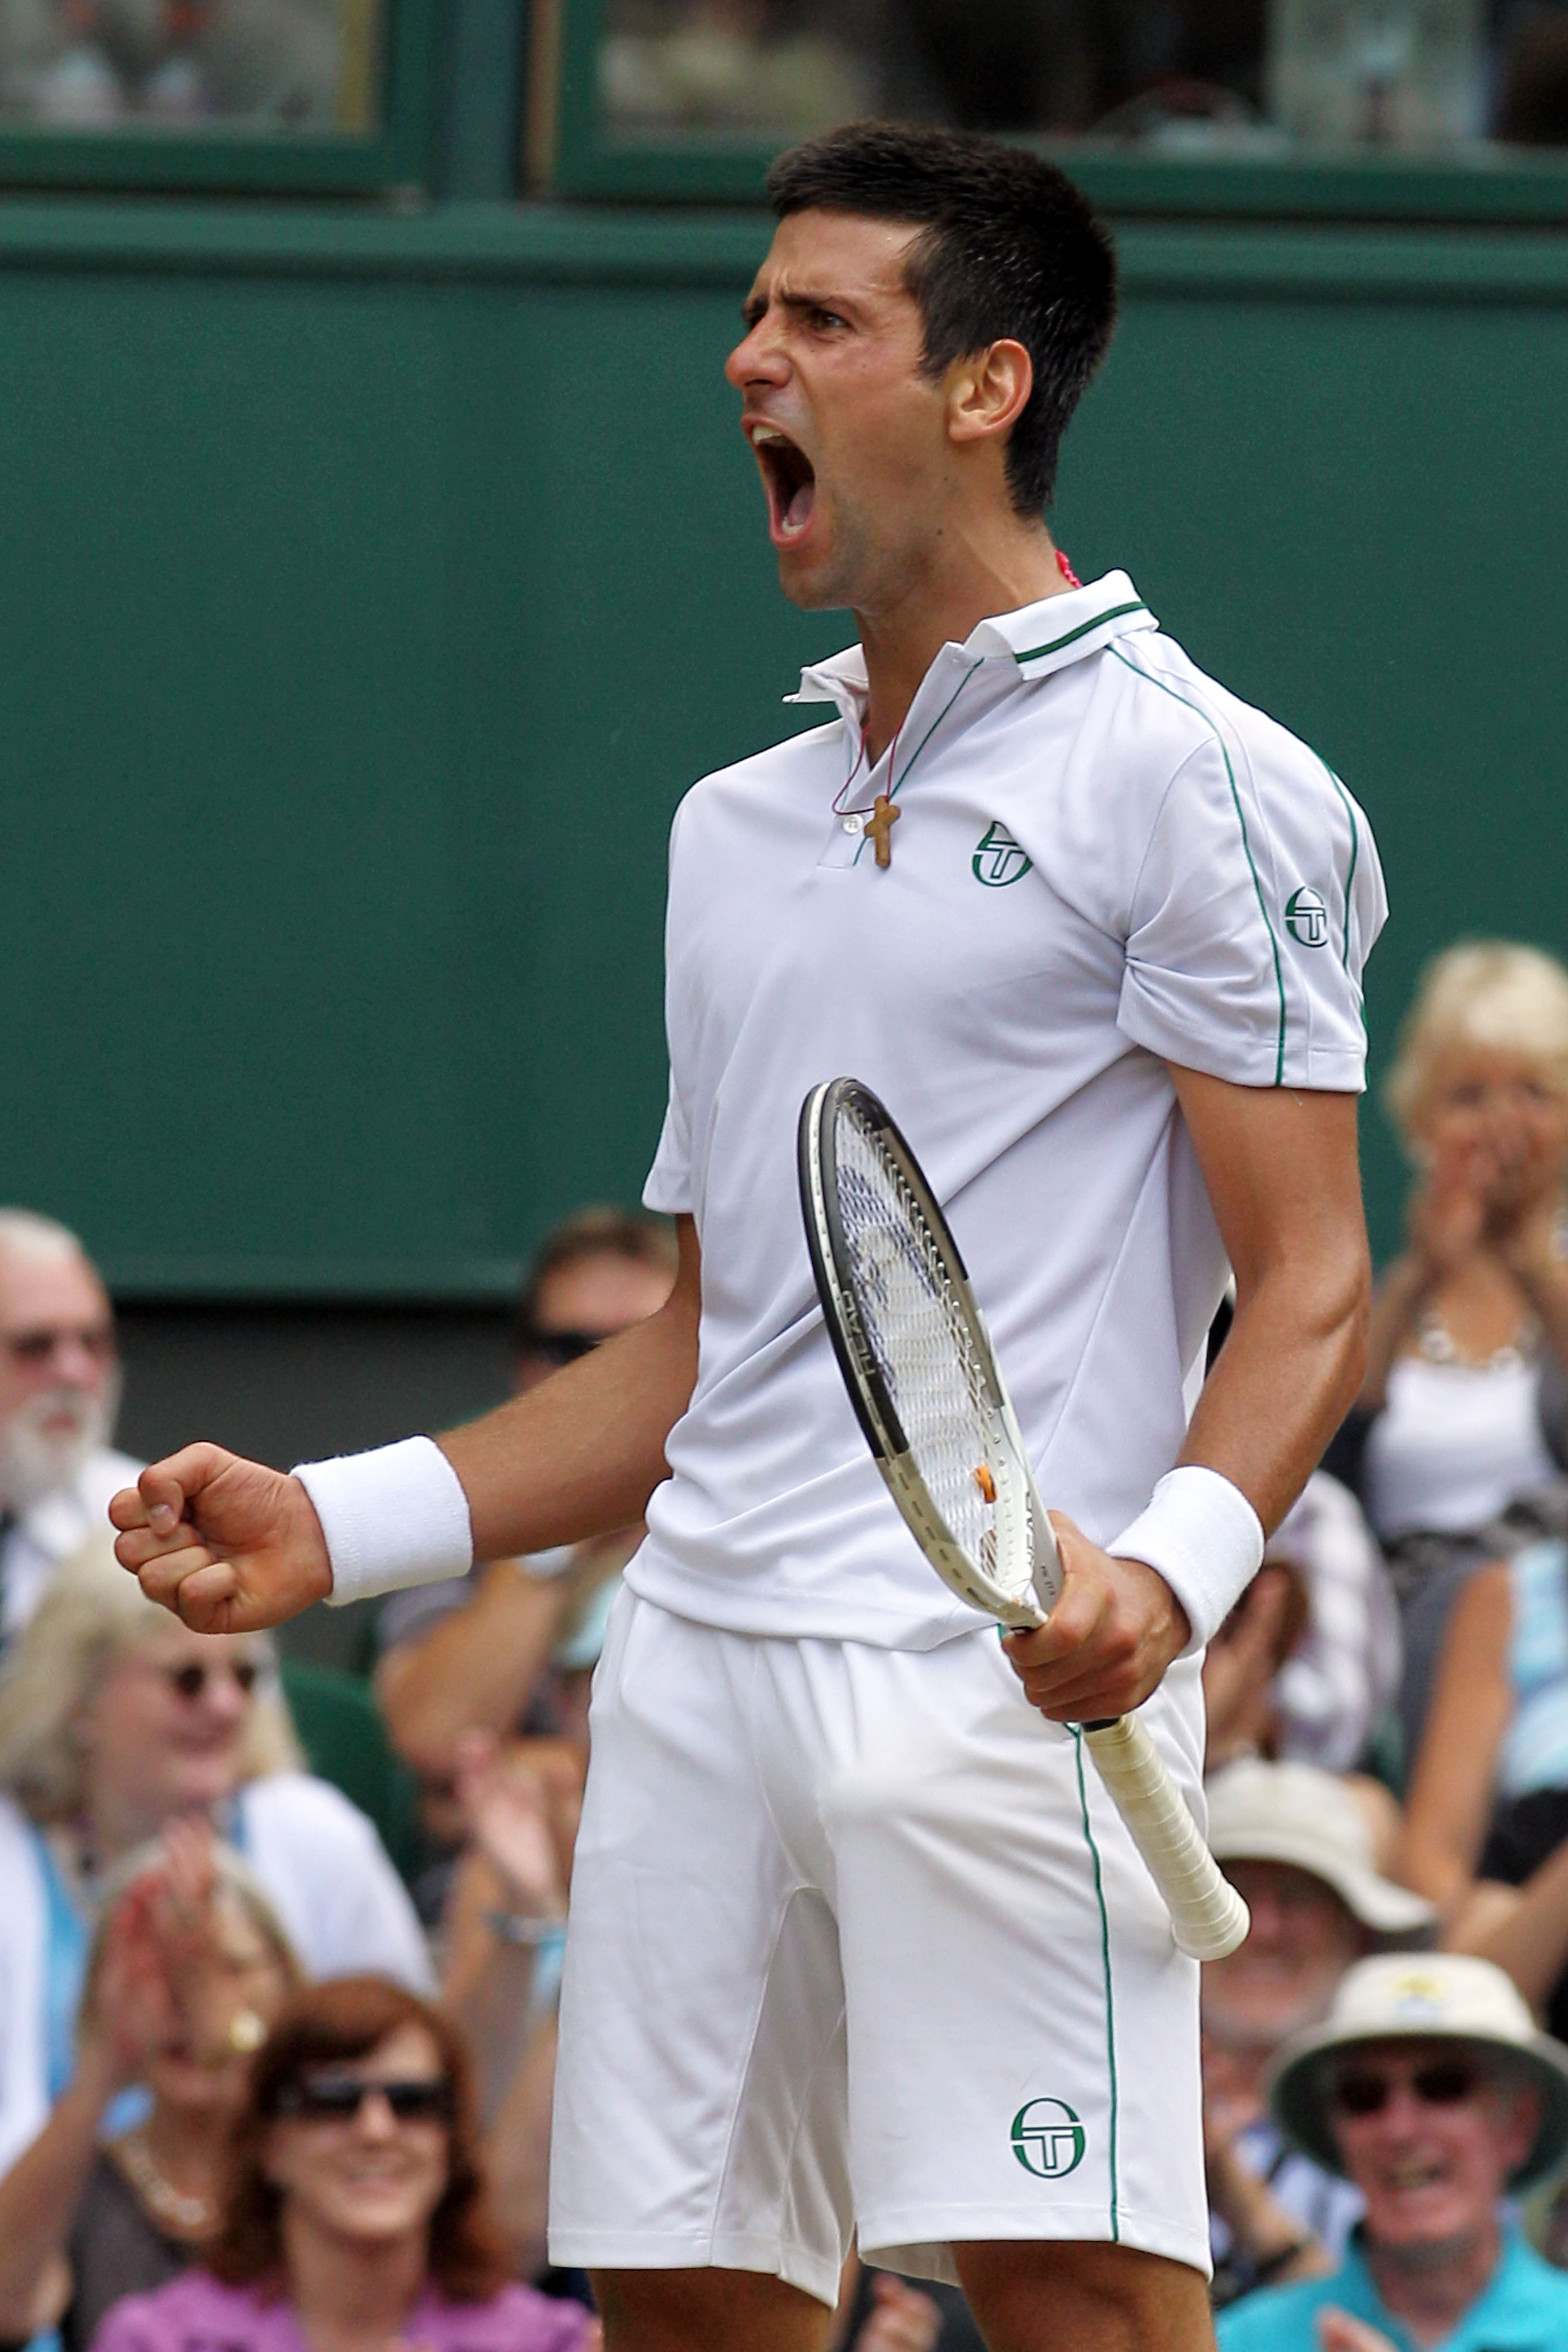 LONDON, ENGLAND - JULY 02:  Novak Djokovic of Serbia celebrates a point during the Men�s Semi Final match against Tomas Berdych of Czech Republic on Day Eleven of the Wimbledon Lawn Tennis Championships at the All England Lawn Tennis and Croquet Club on J